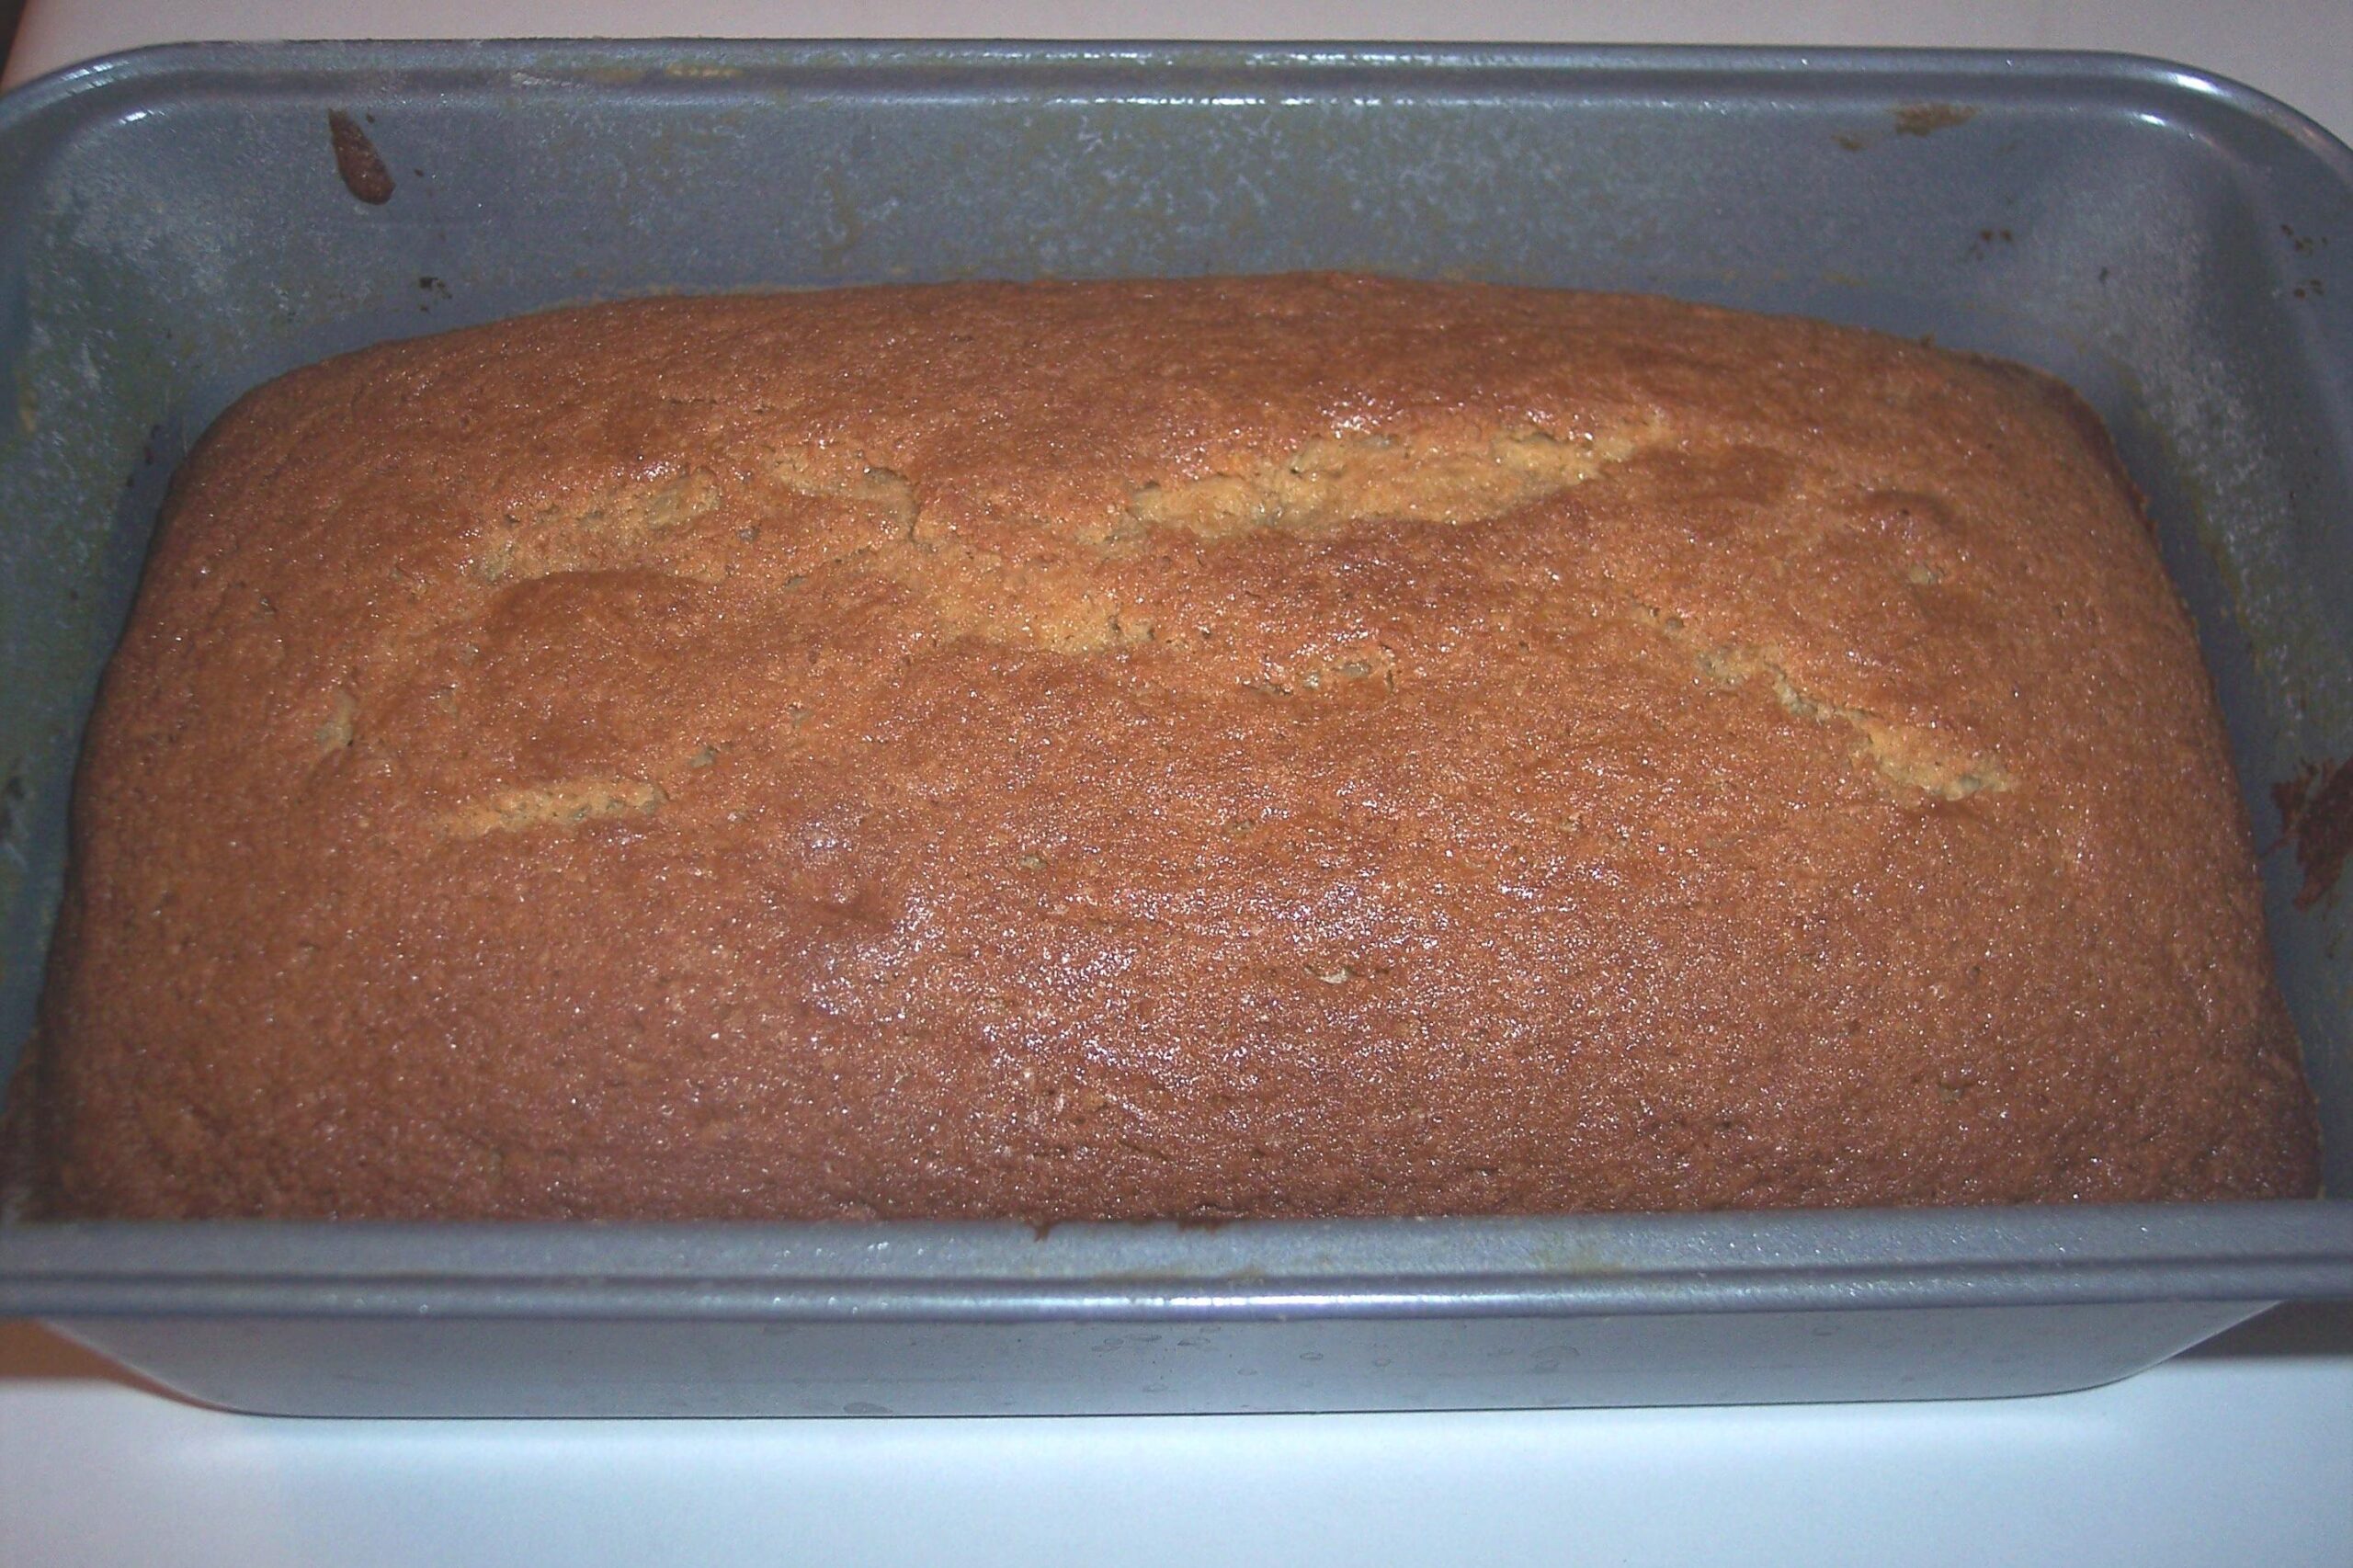  Thick ribbons of brown sugar run through every slice of this luscious pound cake